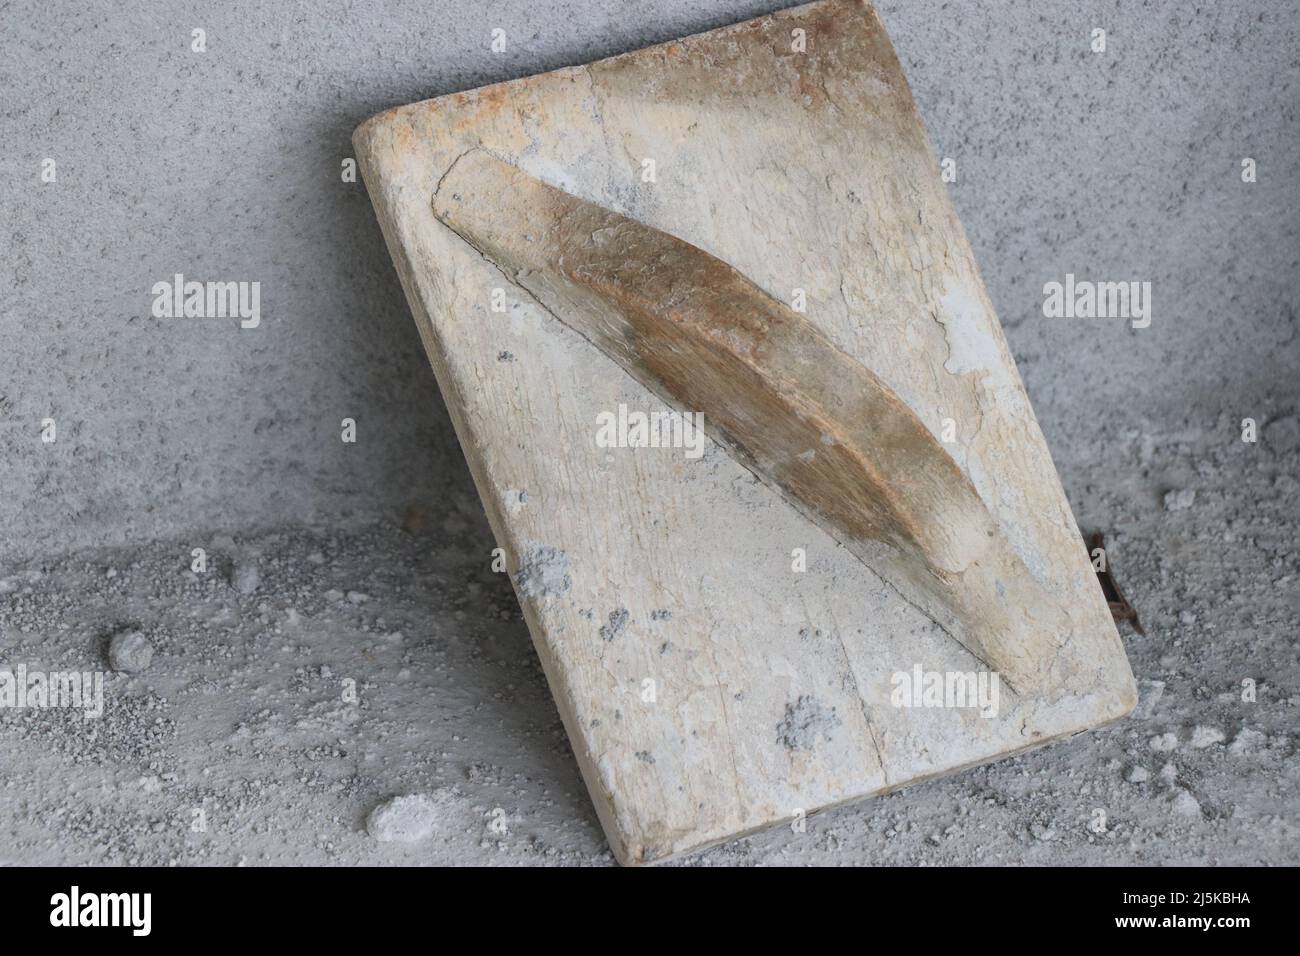 Wooden trowel used for planing concrete surface after plastering. The old way of construction using wooden tools Stock Photo